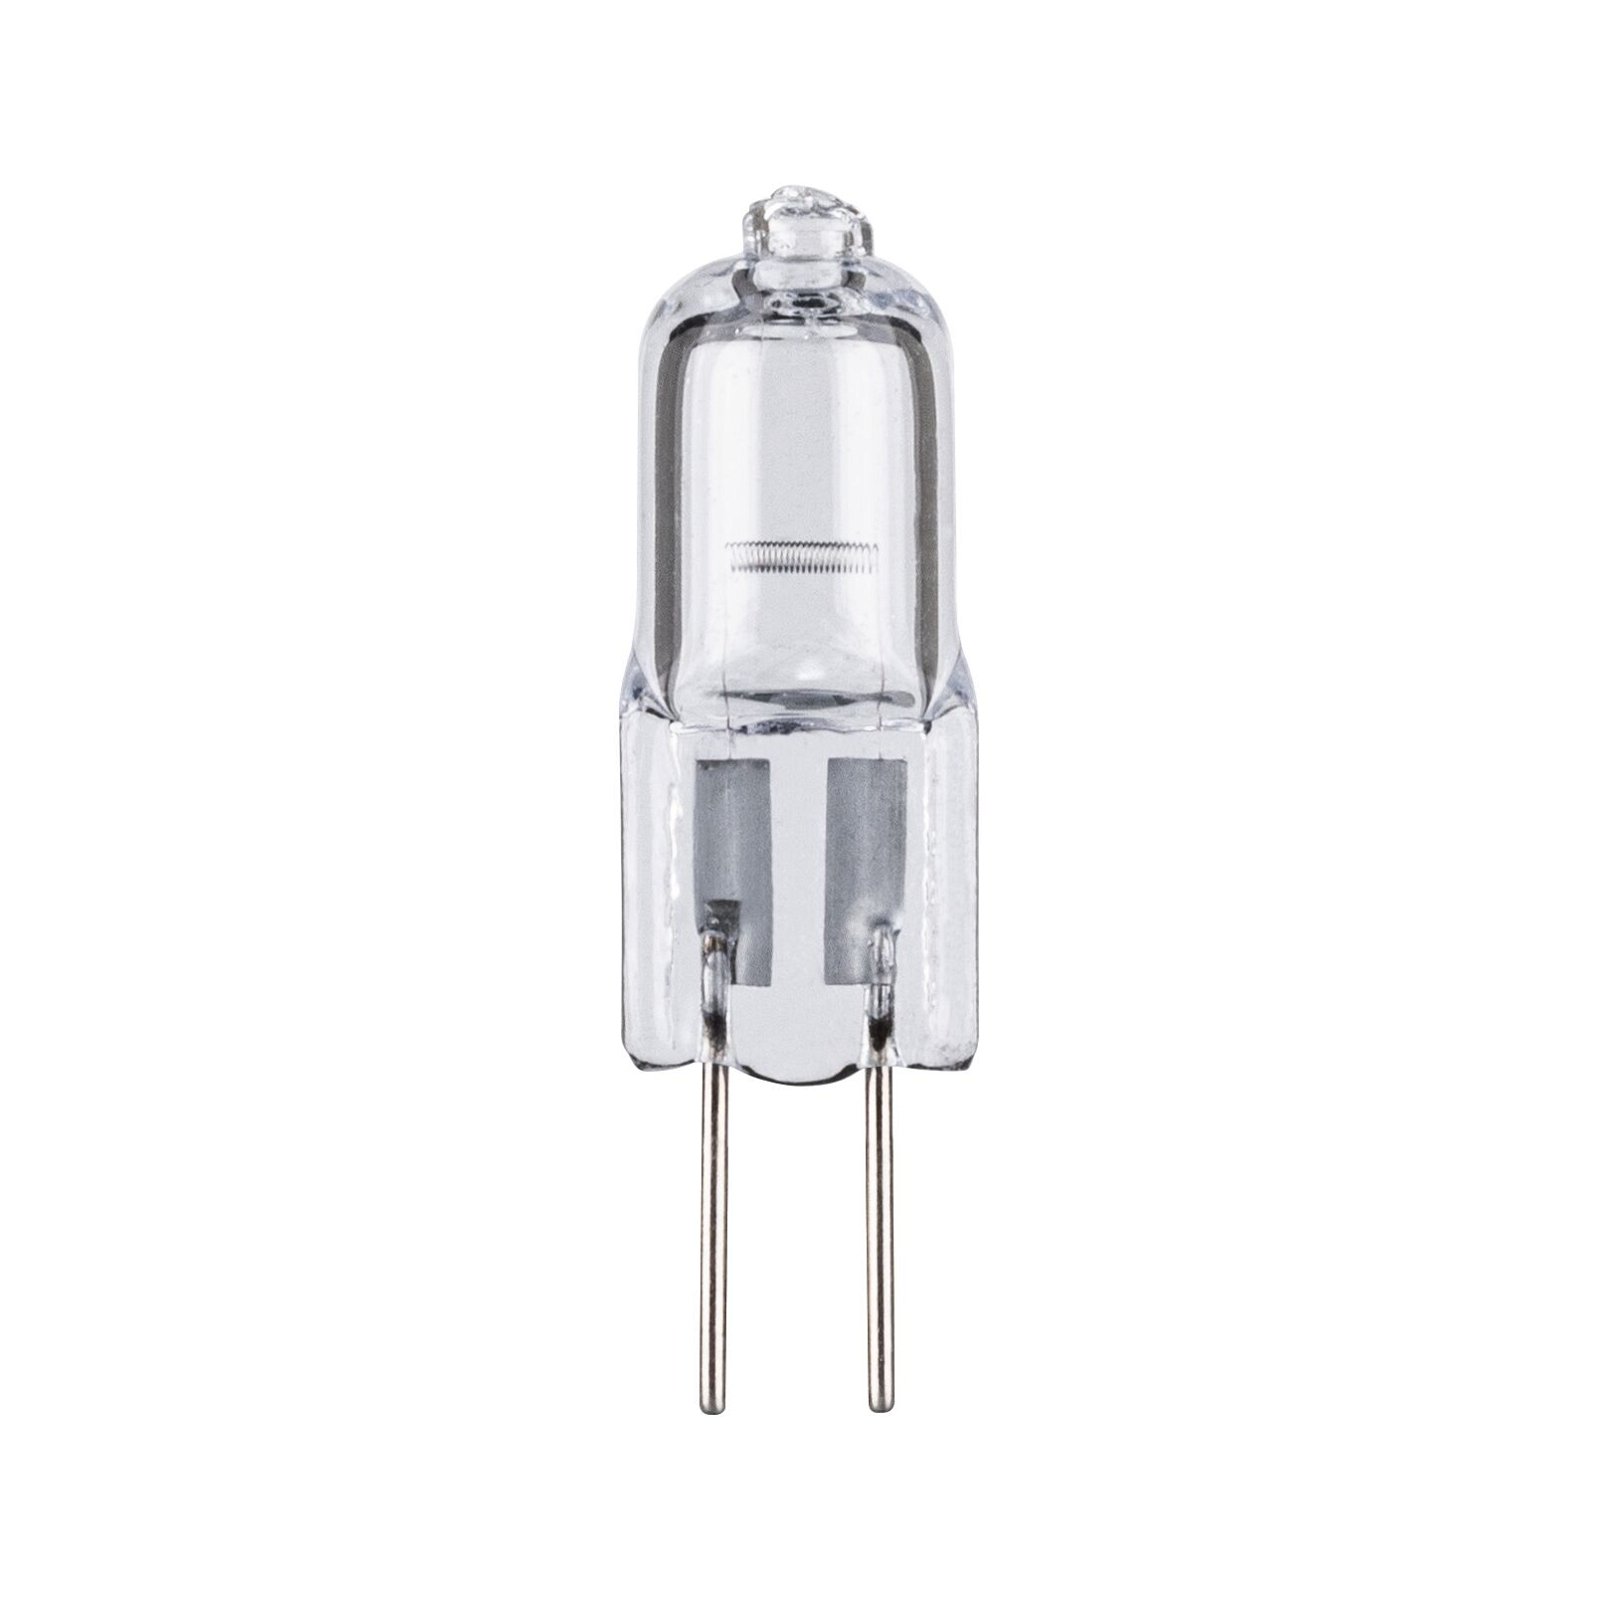 Halogen pin base Oven G4 12V 100lm 10W 2700K dimmable Clear